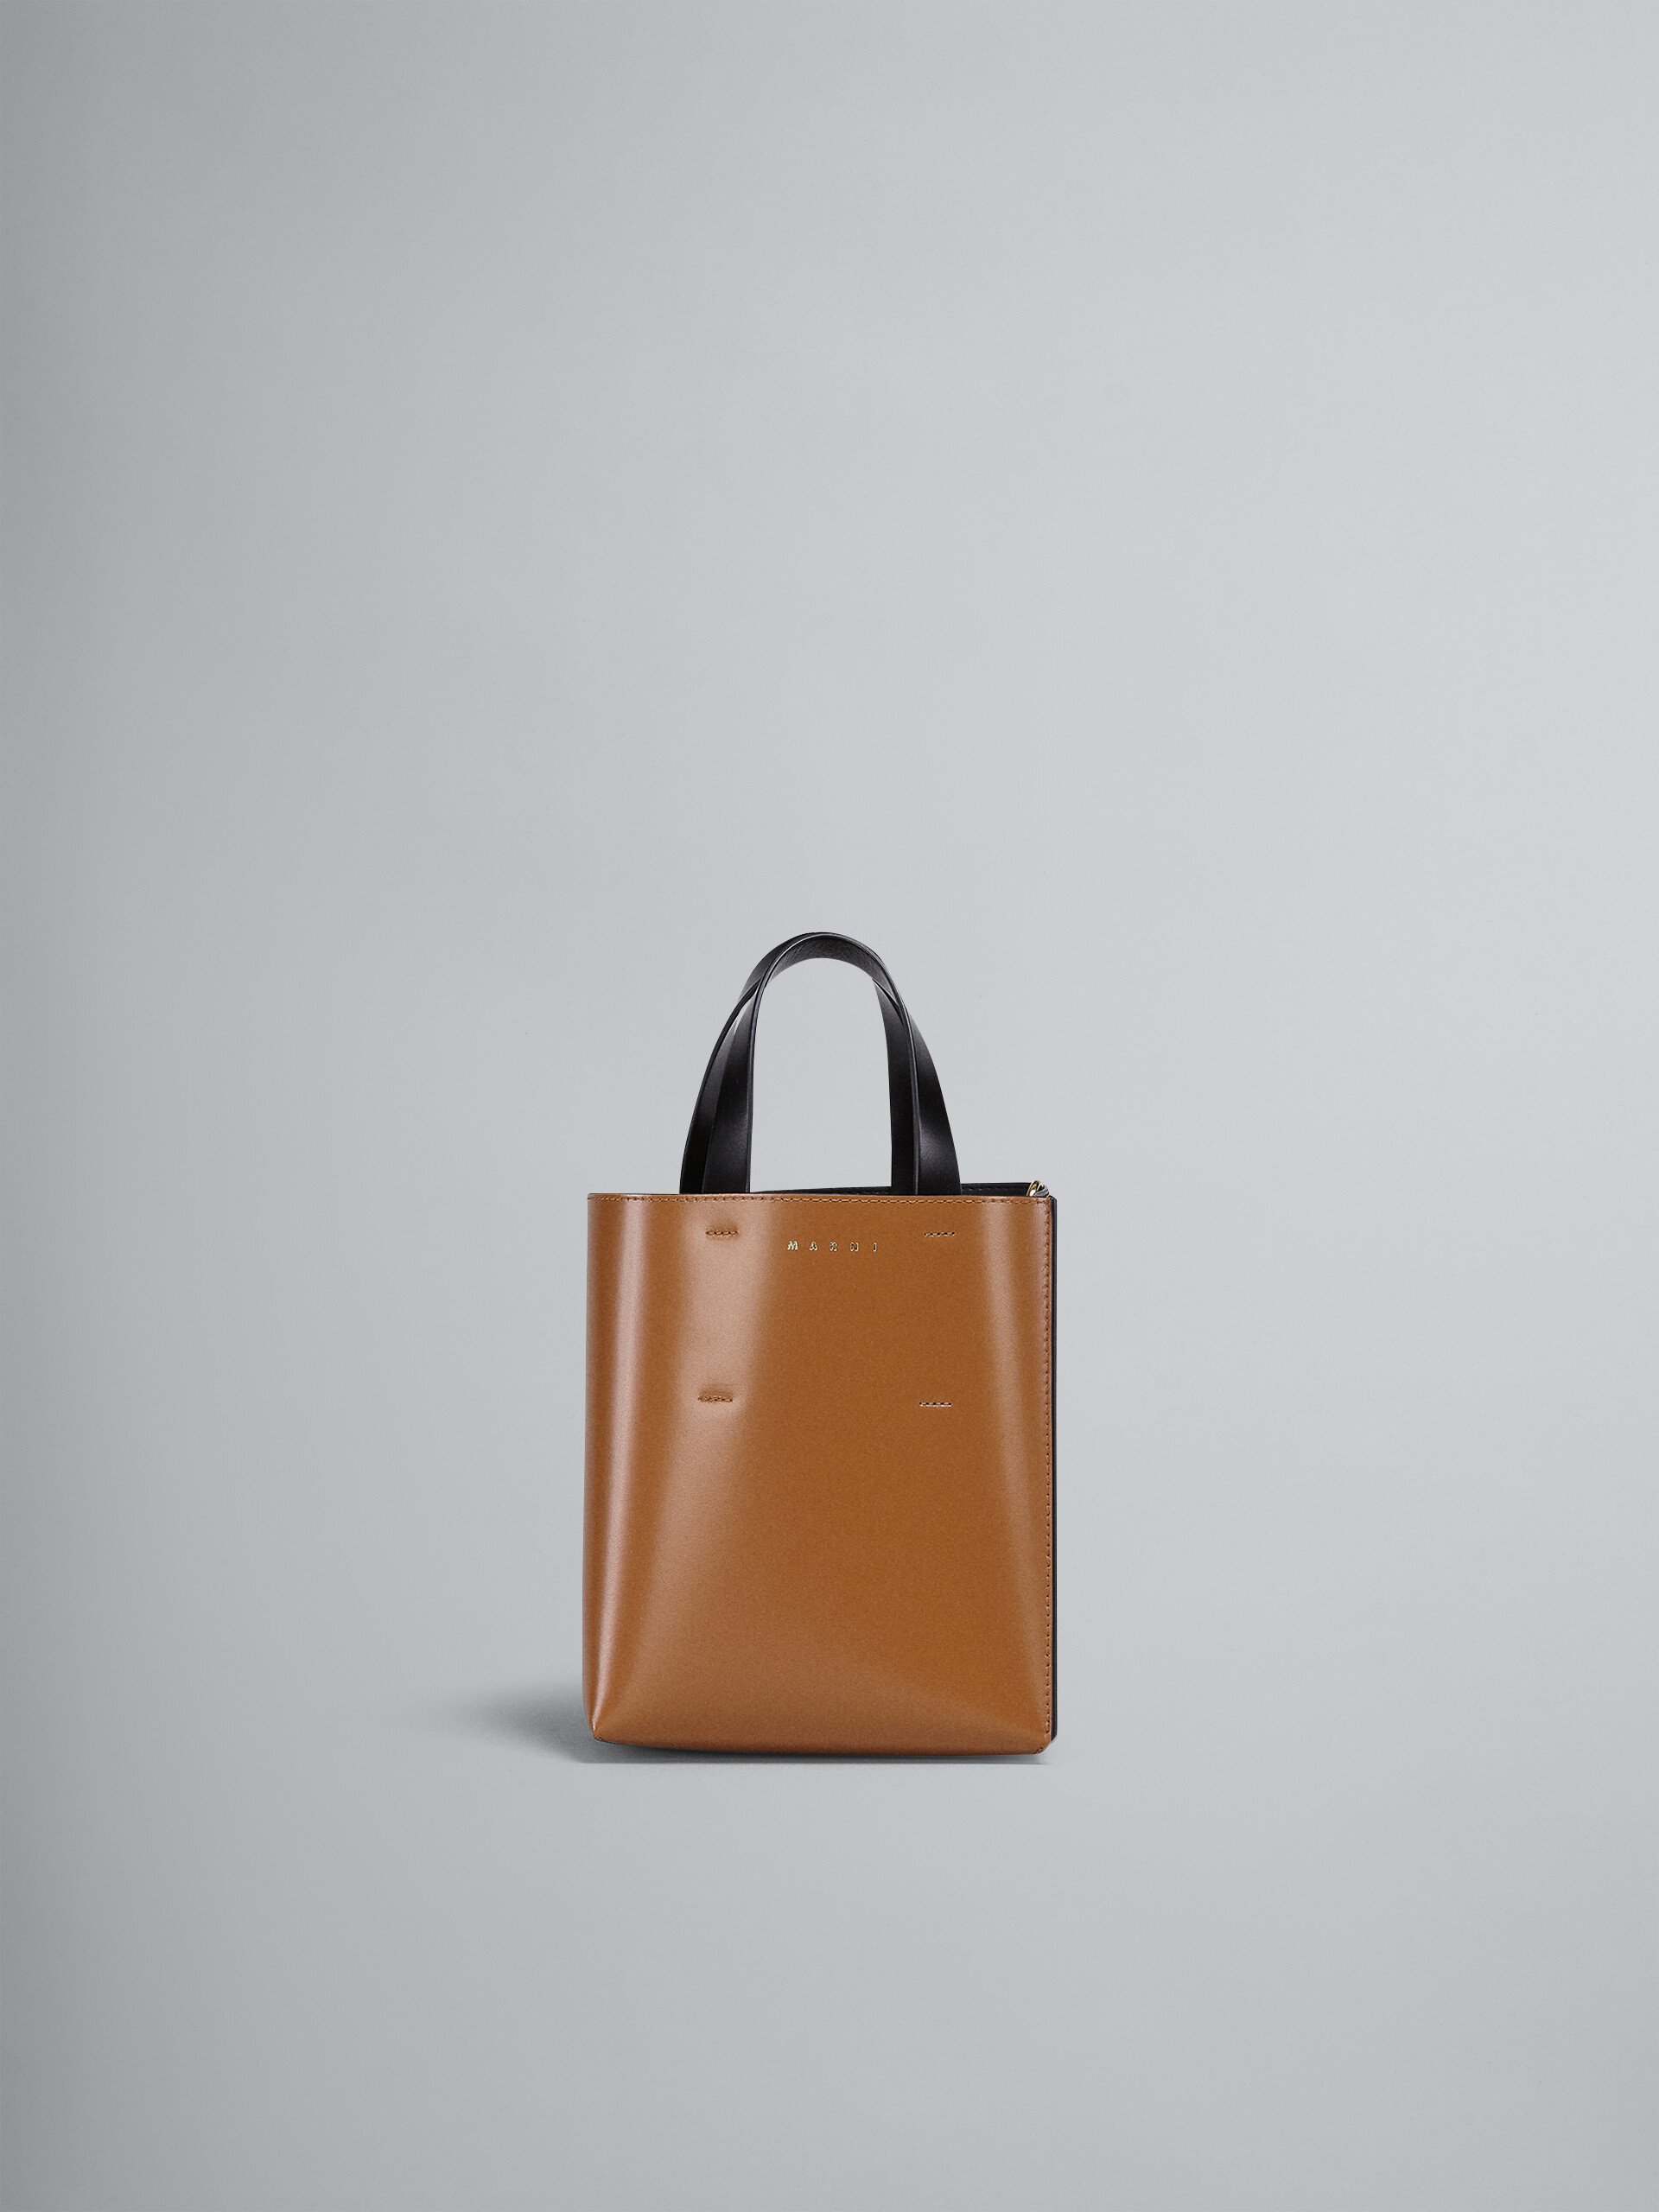 Museo Mini Bag in black and brown leather - Shopping Bags - Image 1